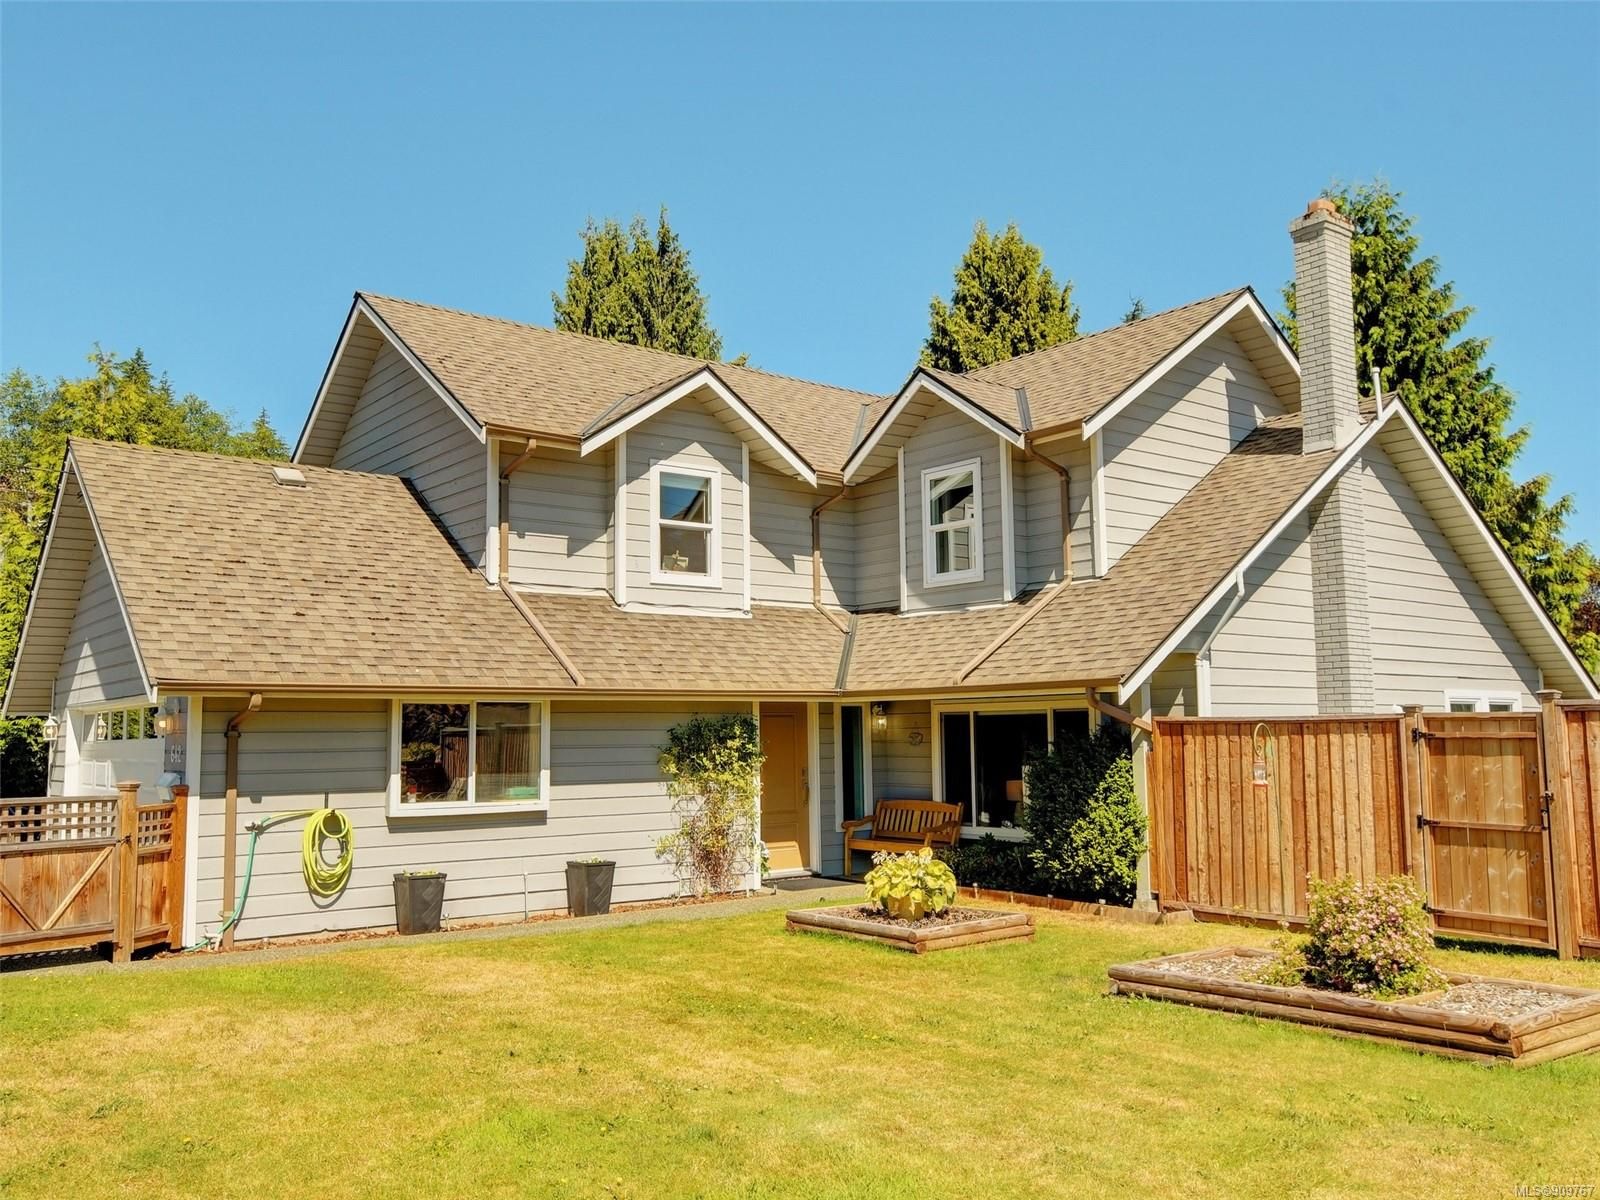 I have sold a property at 642 Cairndale Rd in Colwood
